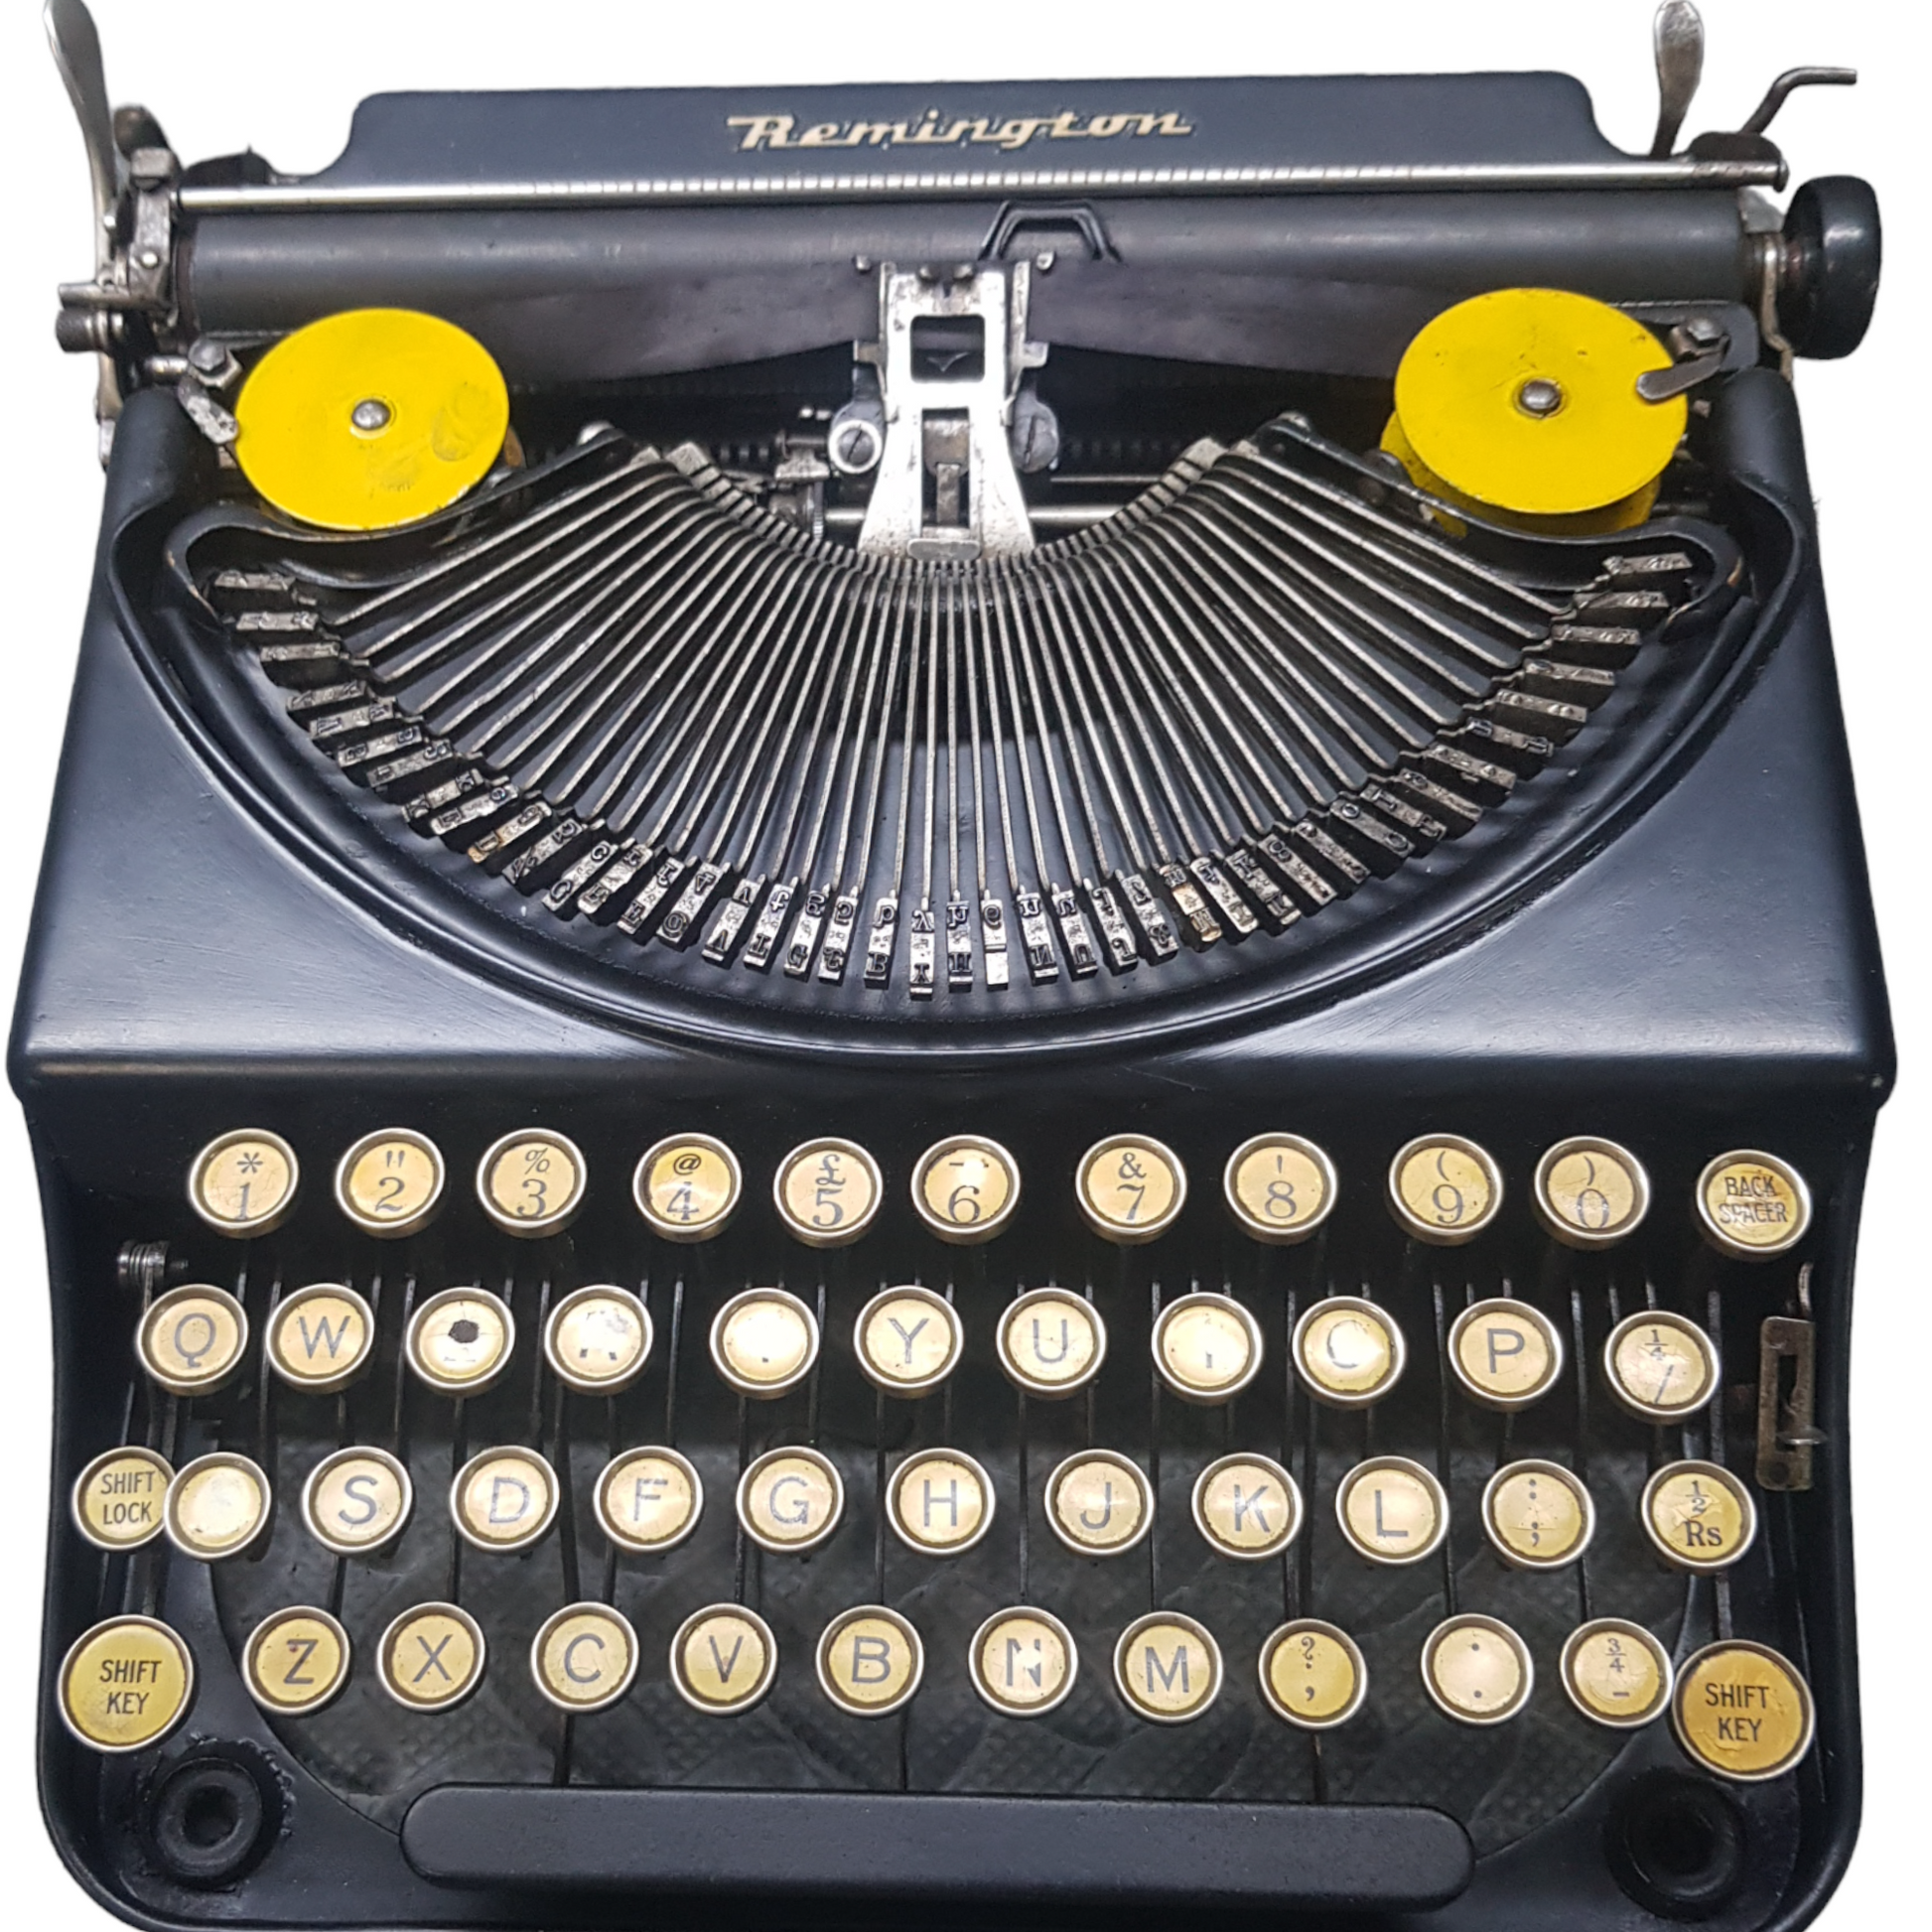 Image of Remington Mode 2 Lifting Typewriter. A Rare Antique Century old Metal Keyring Portable Typewriter. Made in the USA. Available from Universal Typewriter Company.